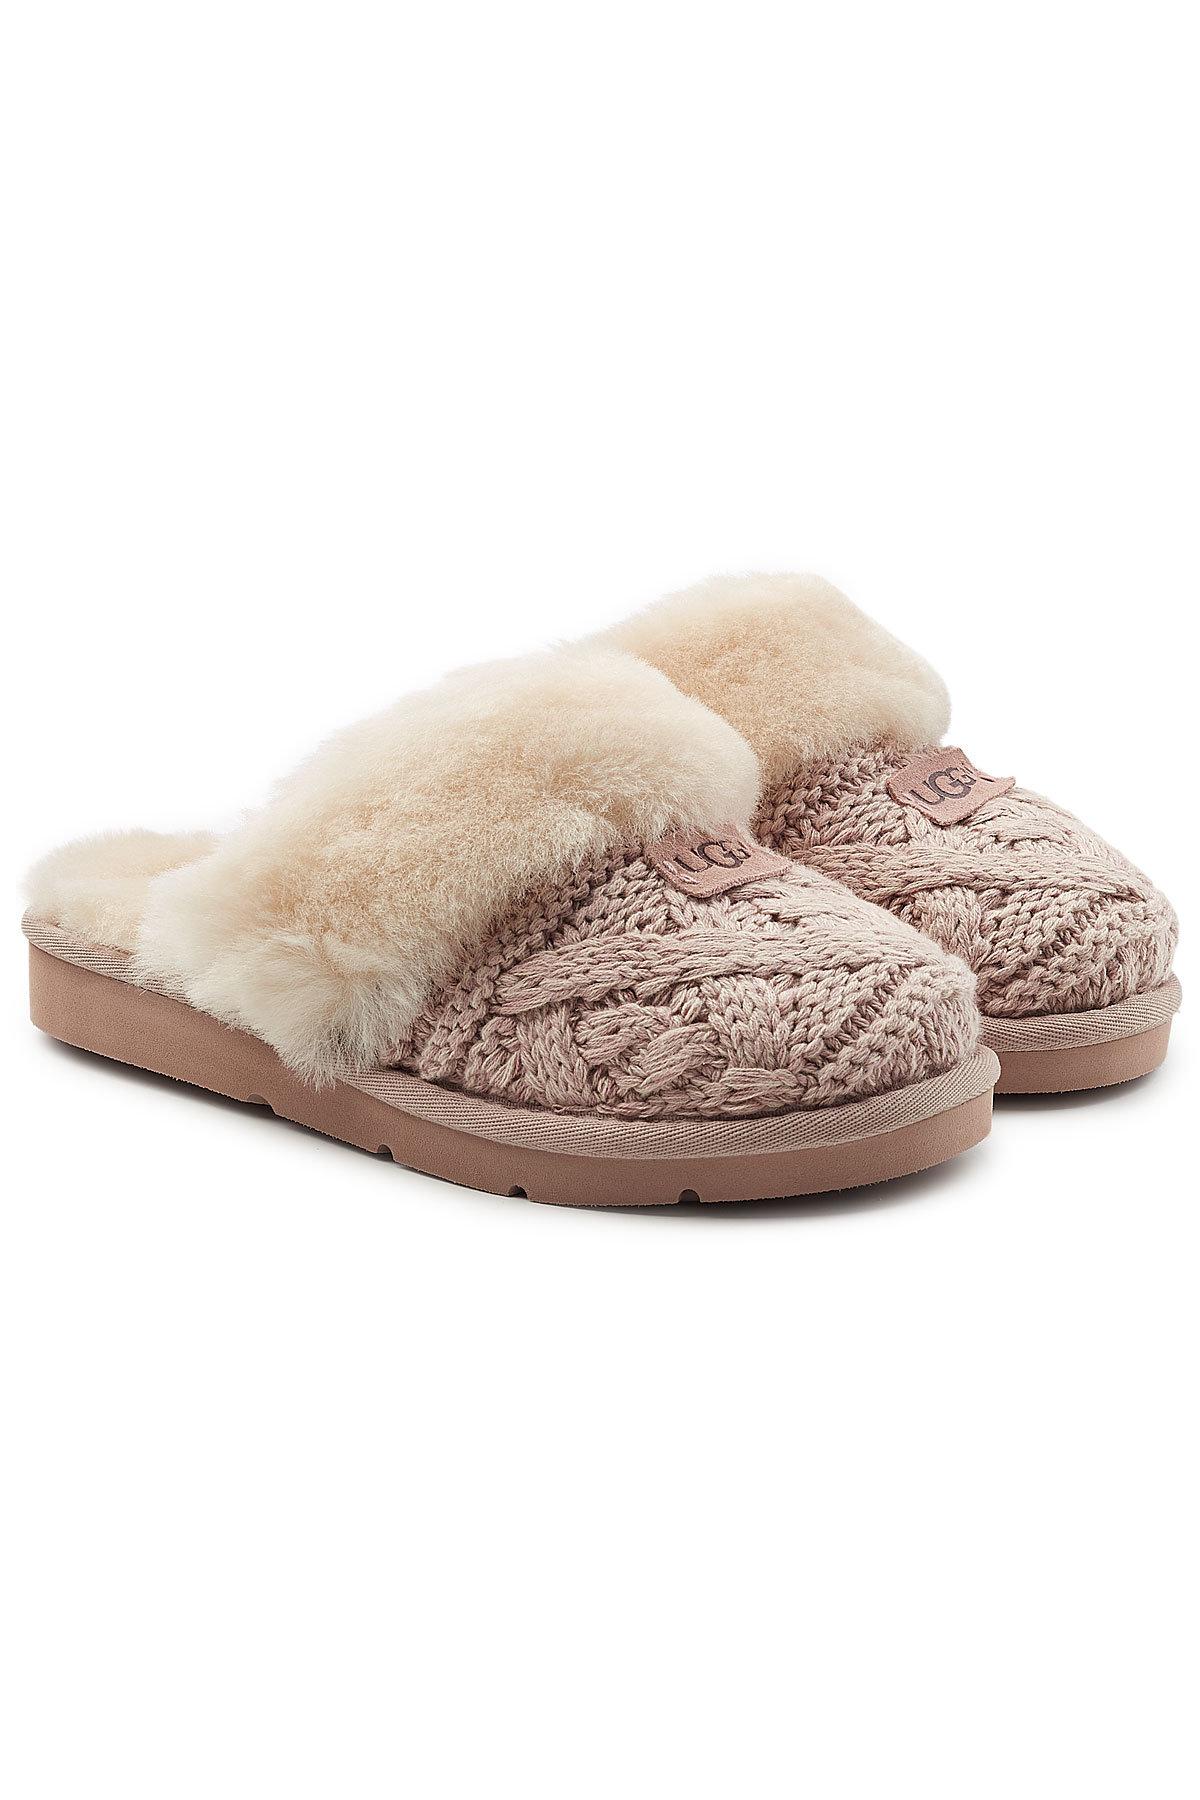 ugg cosy knit slippers